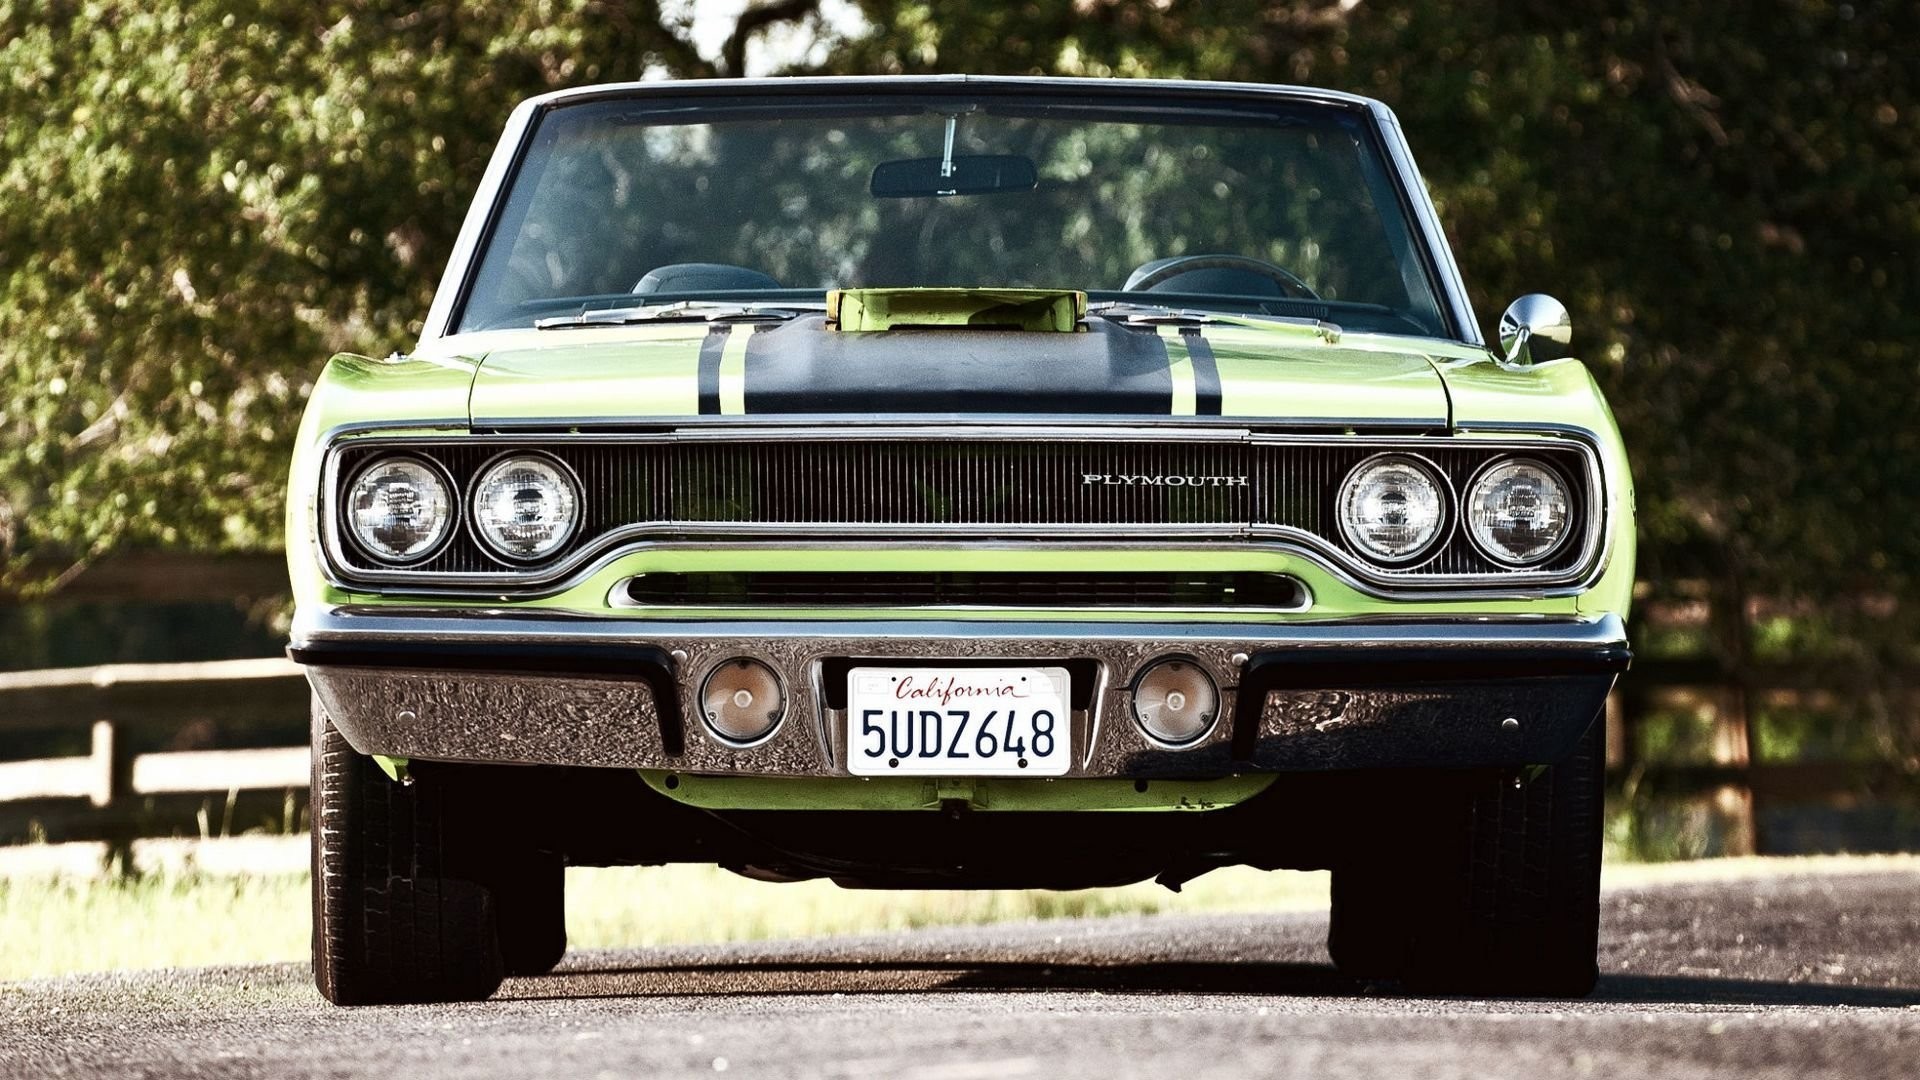 Car Wallpapers Green Plymouth Road Runner Convertible Plymouth Roadrunner Wallpaper Hd Hd Wallpaper Backgrounds Download